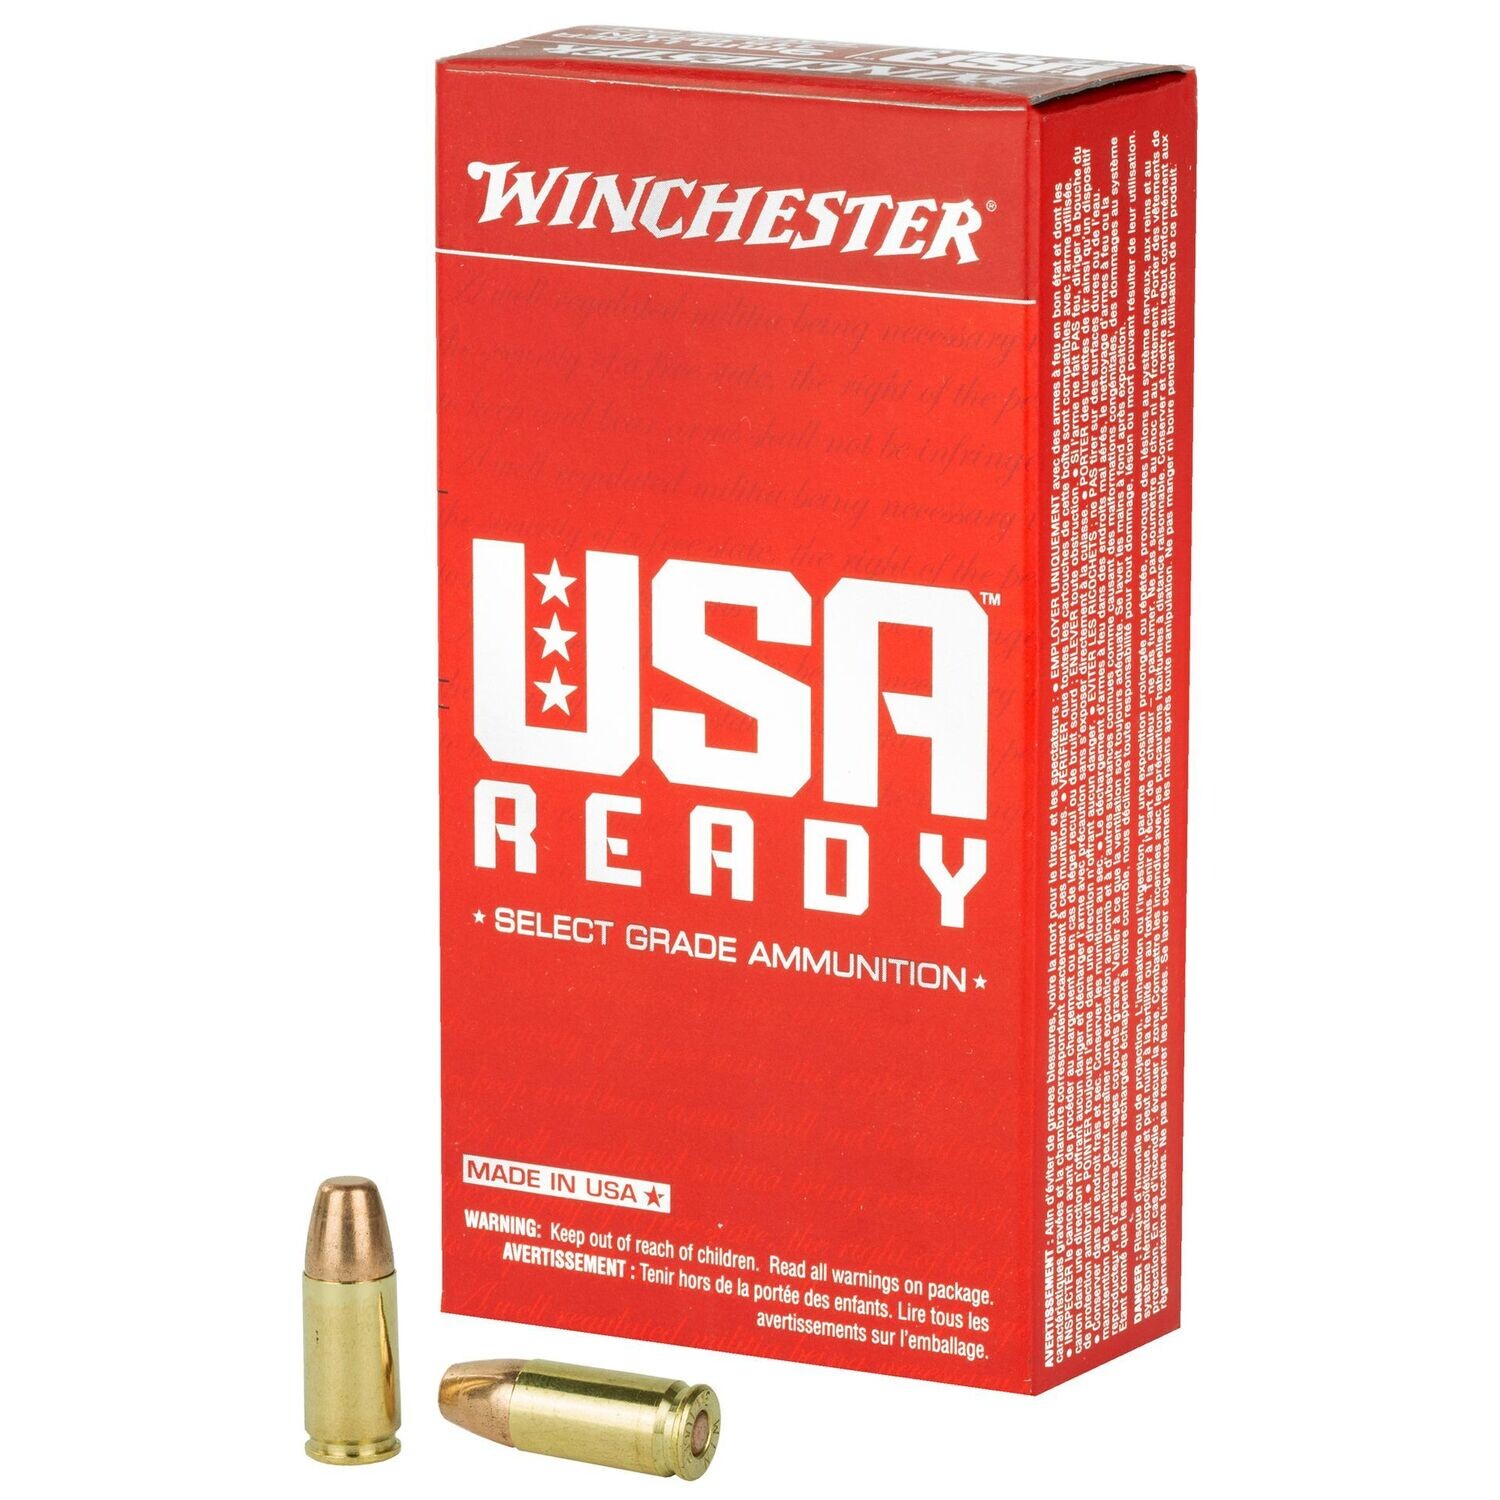 WINCHESTER USA RDY 9MM 115GR FMJ 50/500